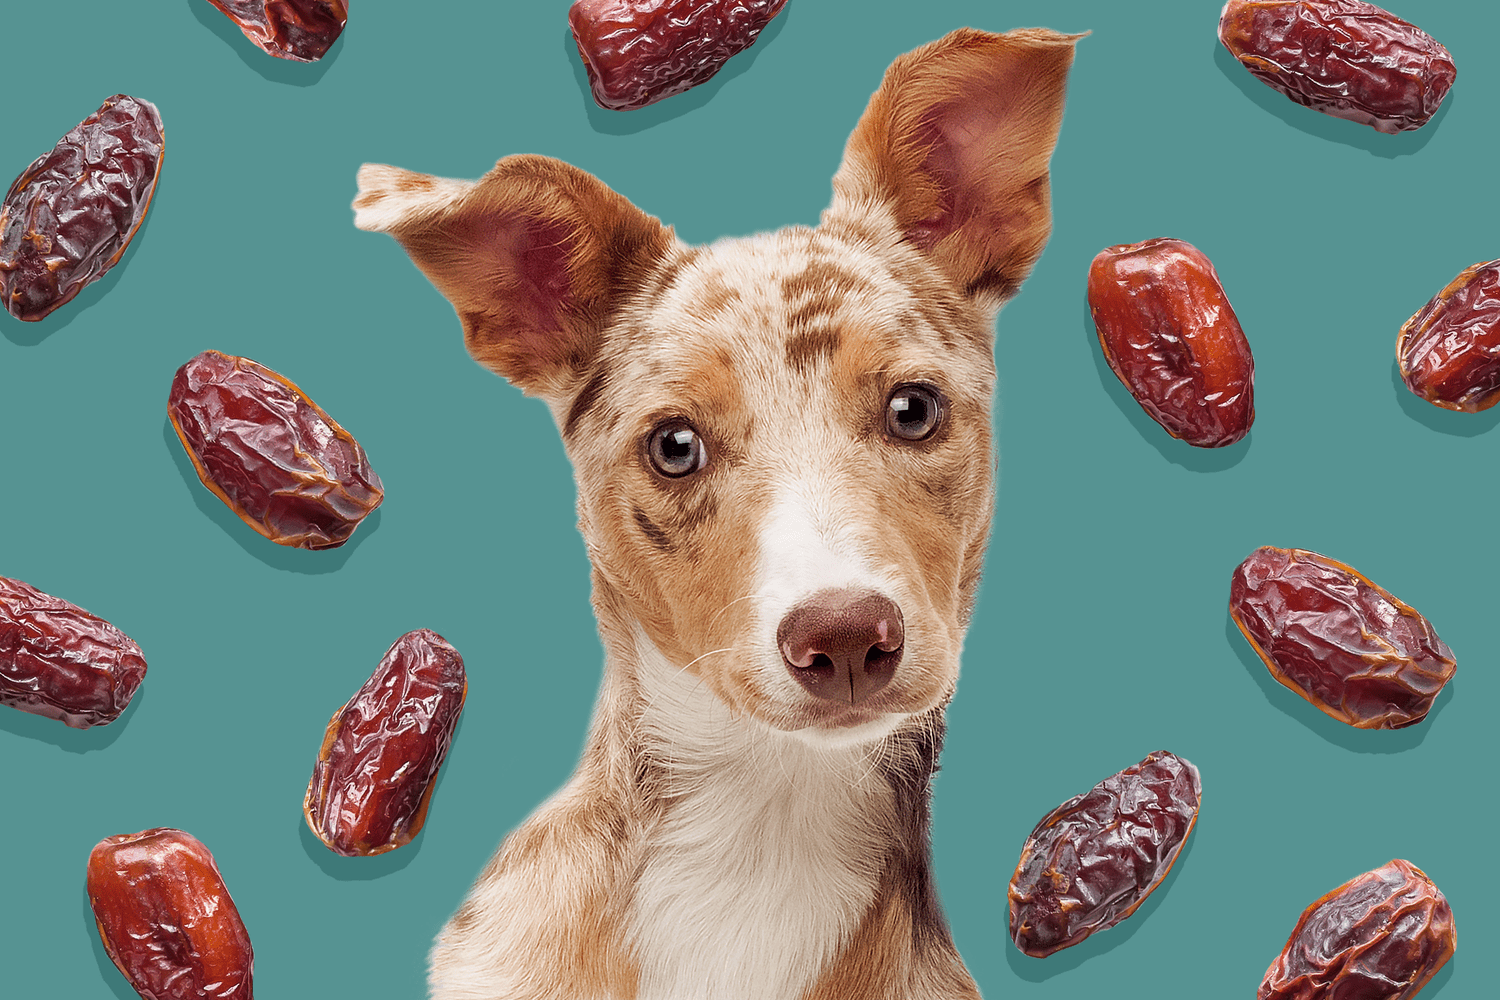 dog with background of dates; can dogs eat dates?